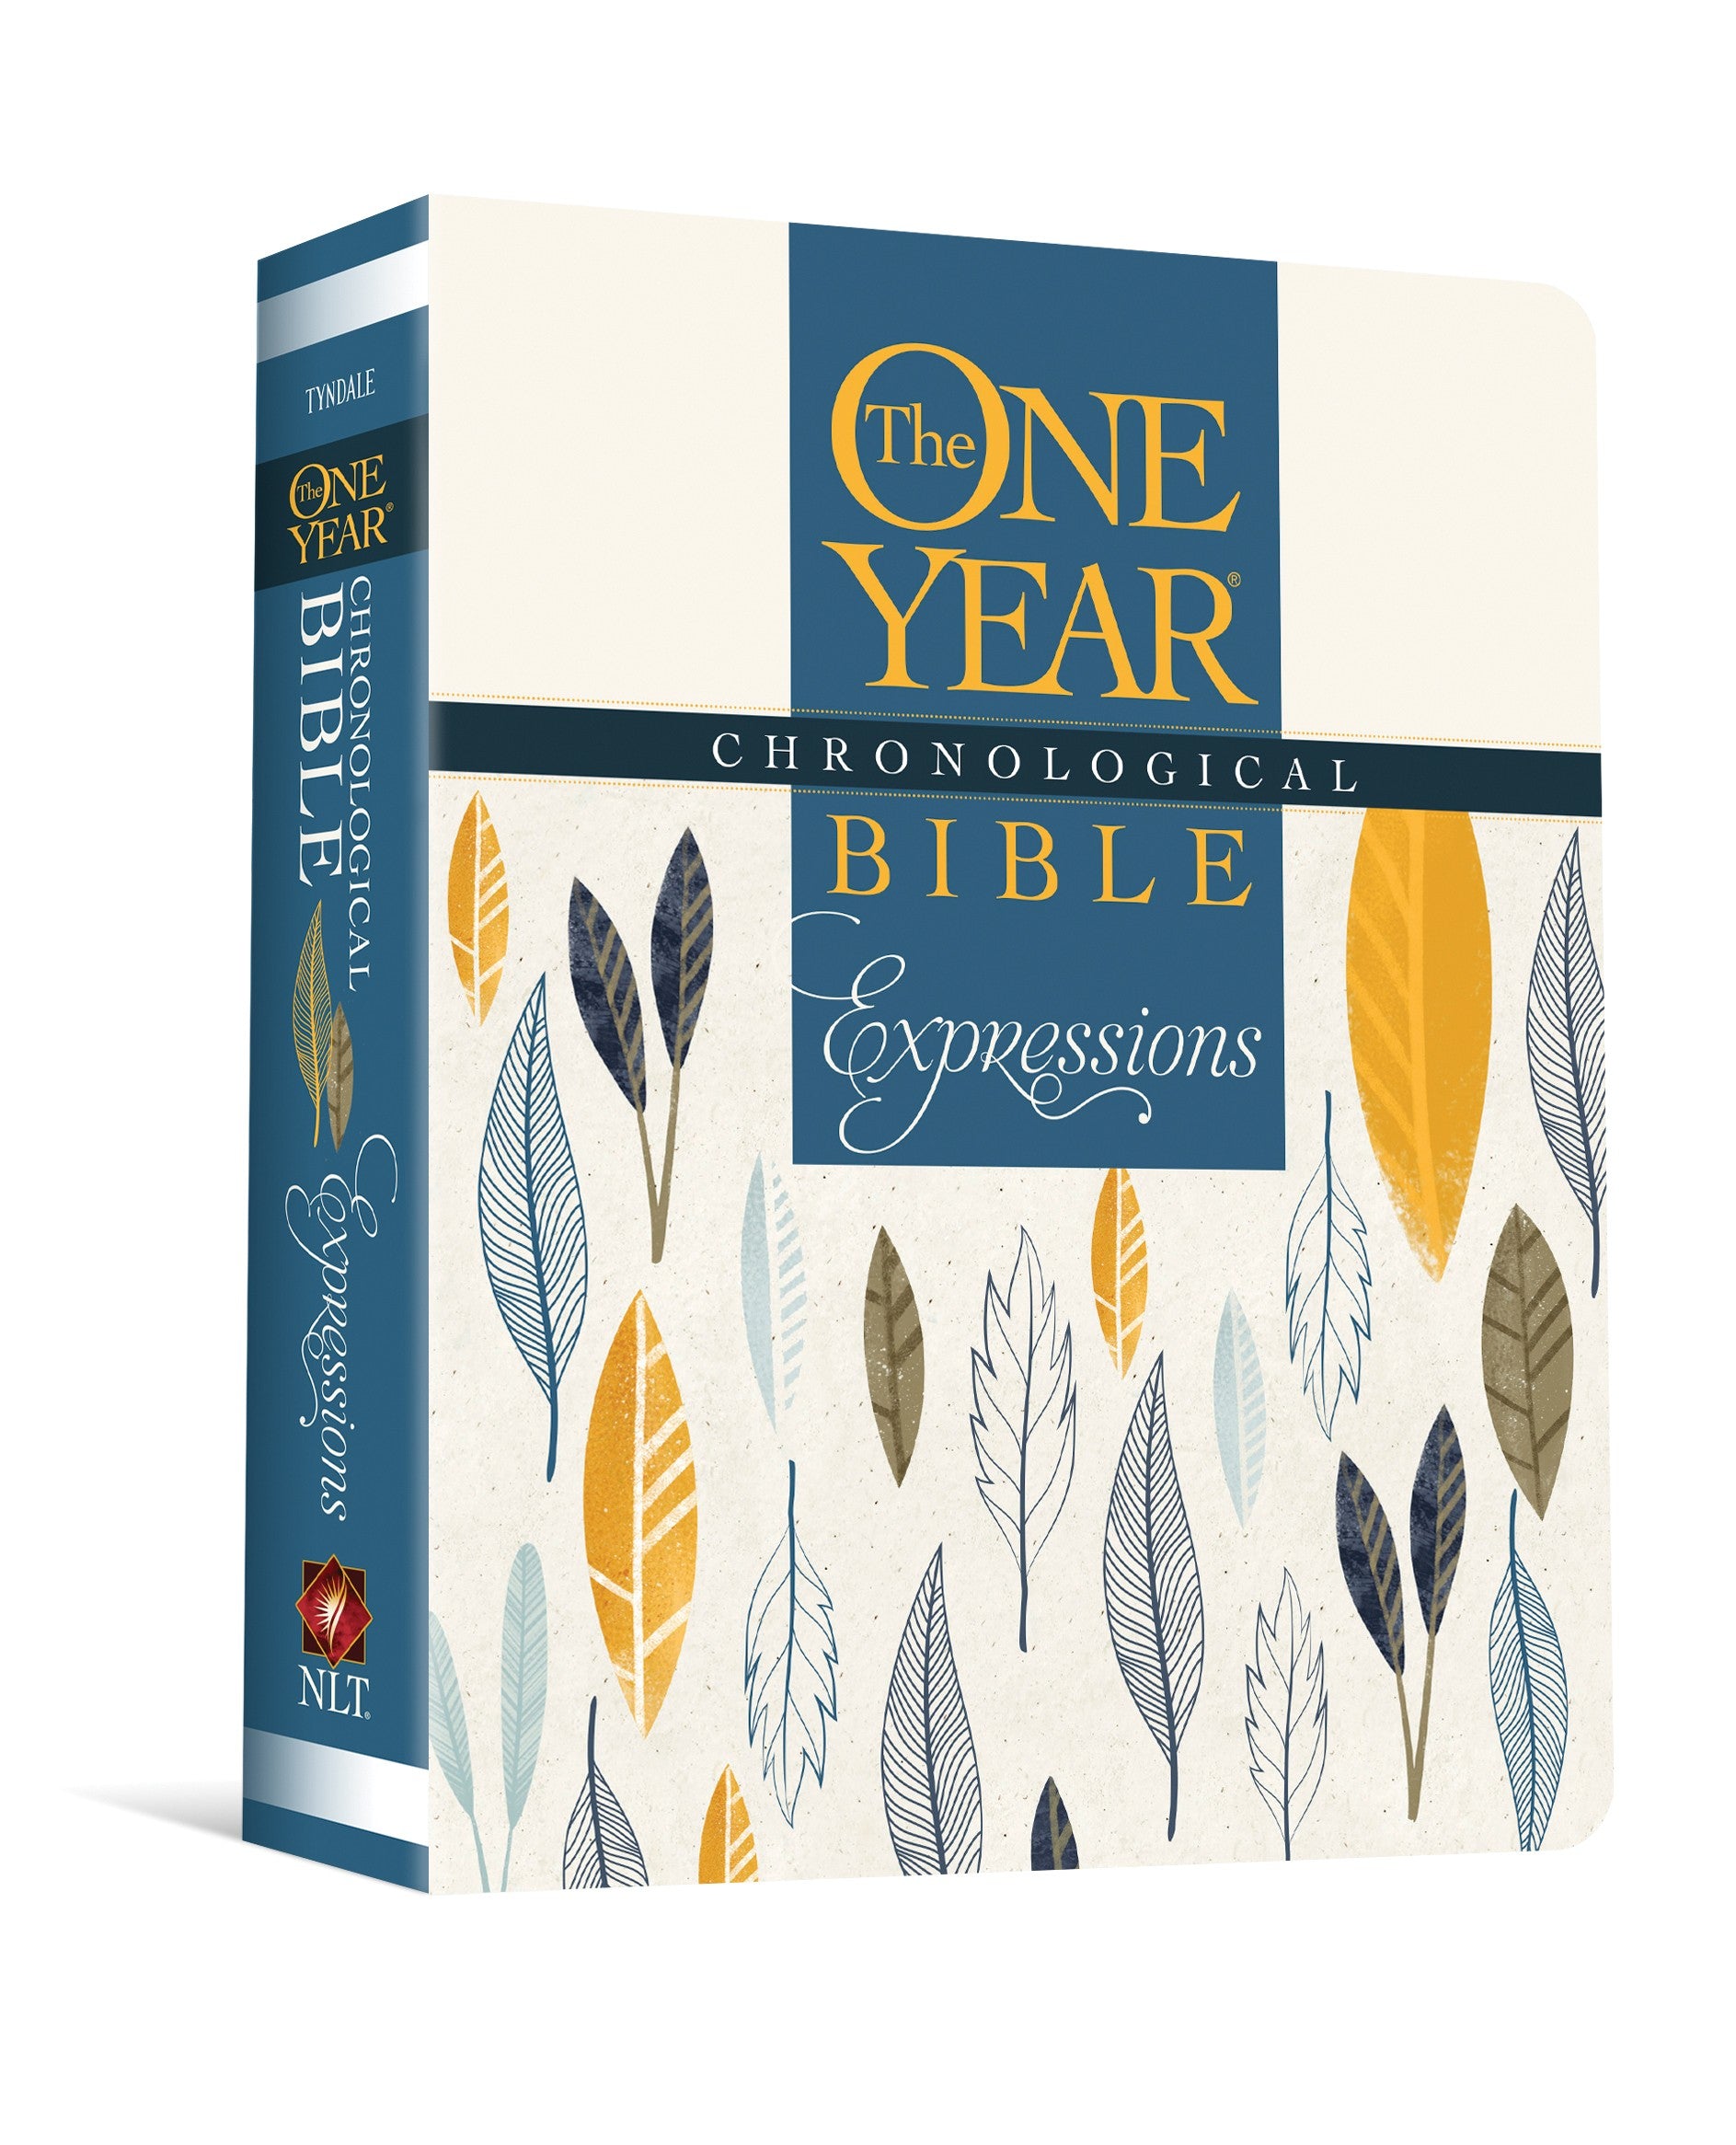 Image of NLT The One Year Chronological Bible, White, Paperback, Expressions Edition, Journalling, Illustrated, Colouring, Wide Margins, Reading Plan, Presentation Page other